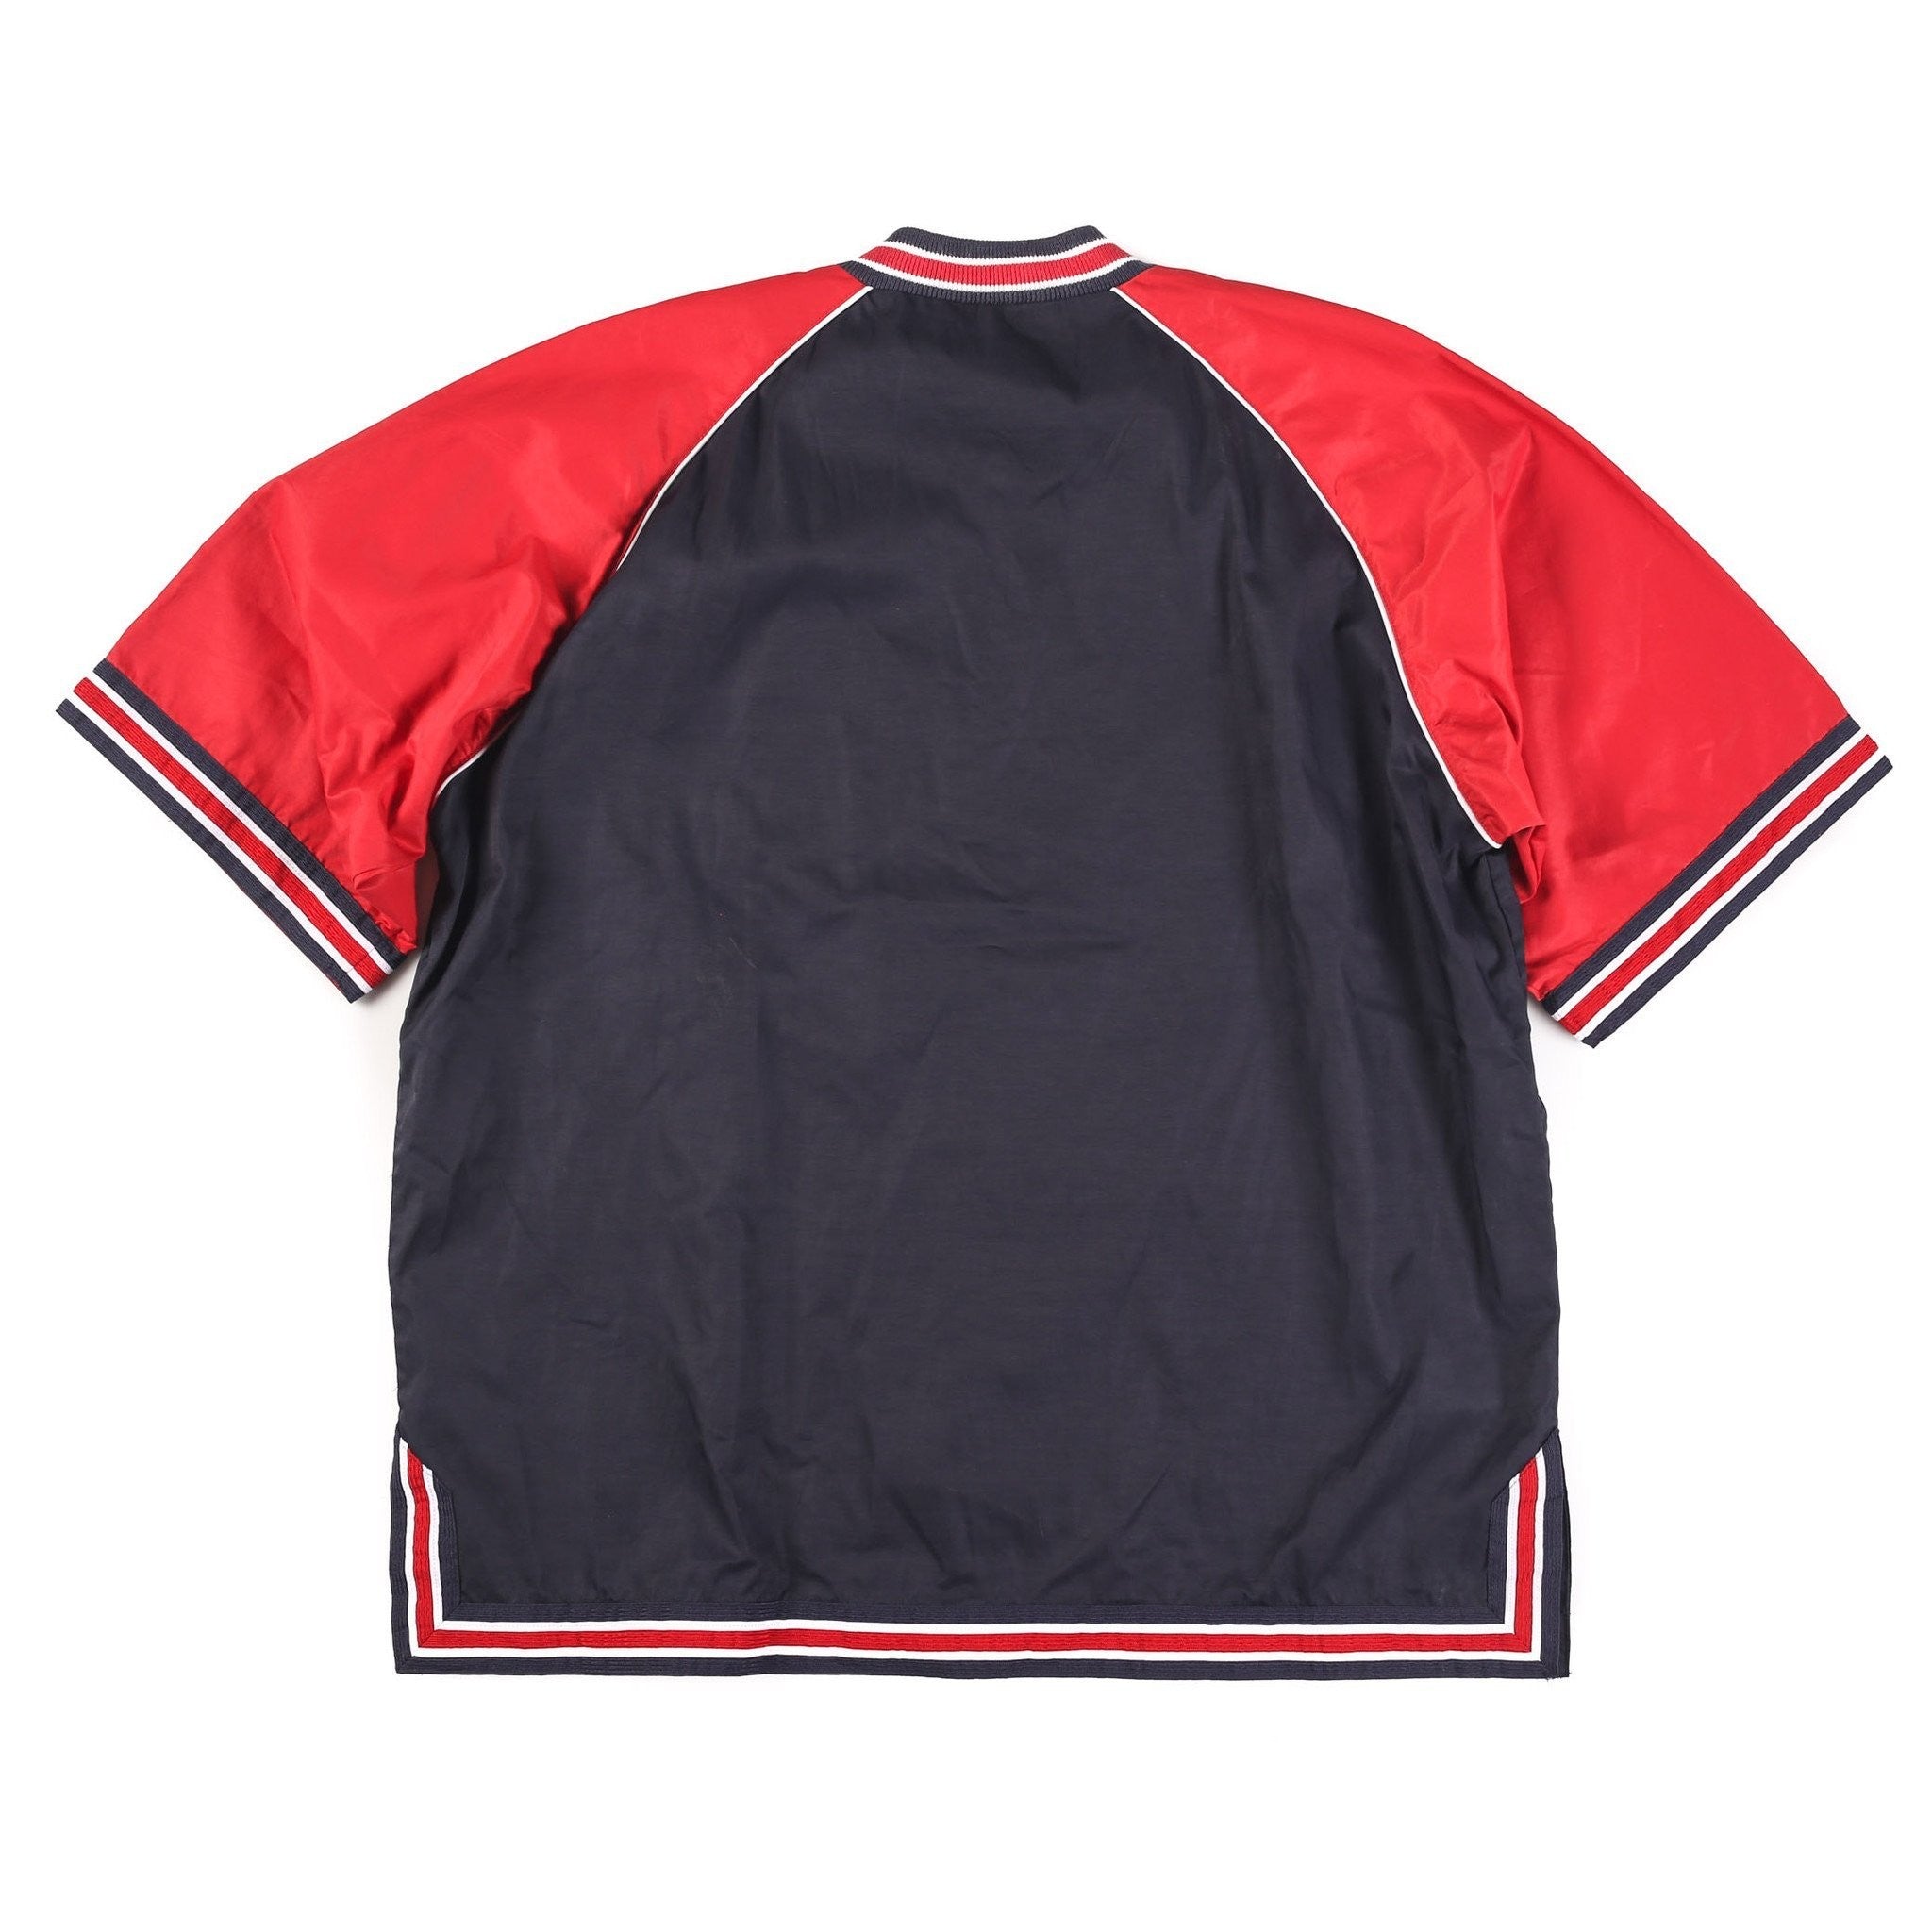 POLO SPORT ALL AMERICAN JERSEY // NAVY RED